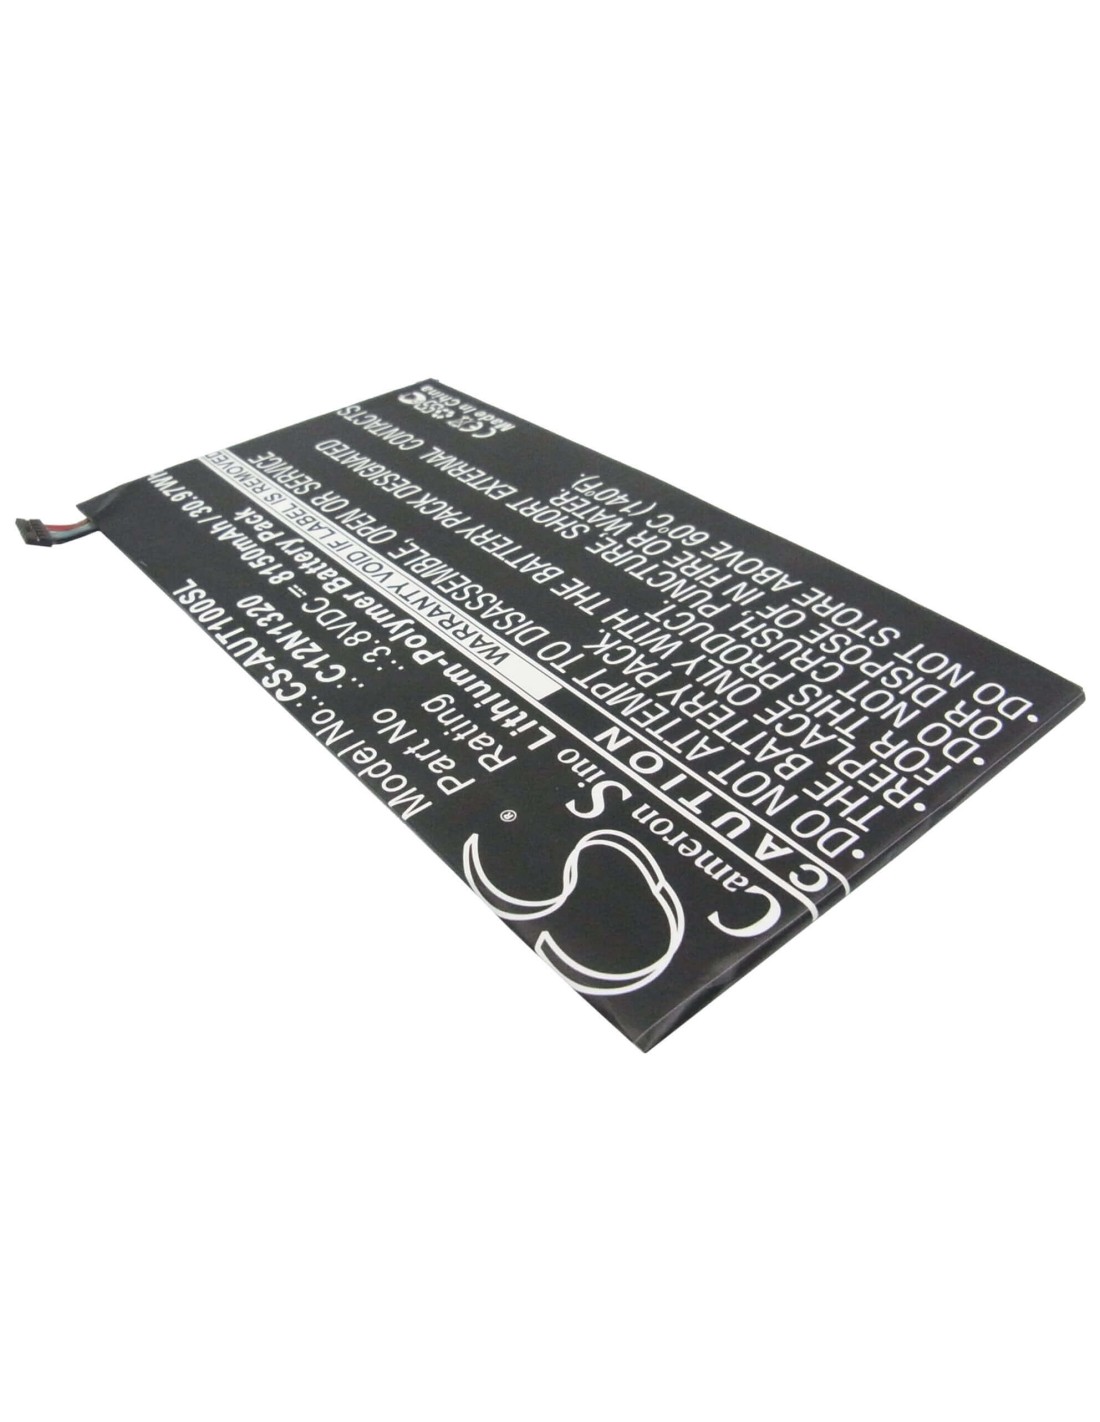 Battery for Asus Transformer Book T100, Transformer Book T100t, Transformer Book T100ta 3.8V, 8150mAh - 30.97Wh